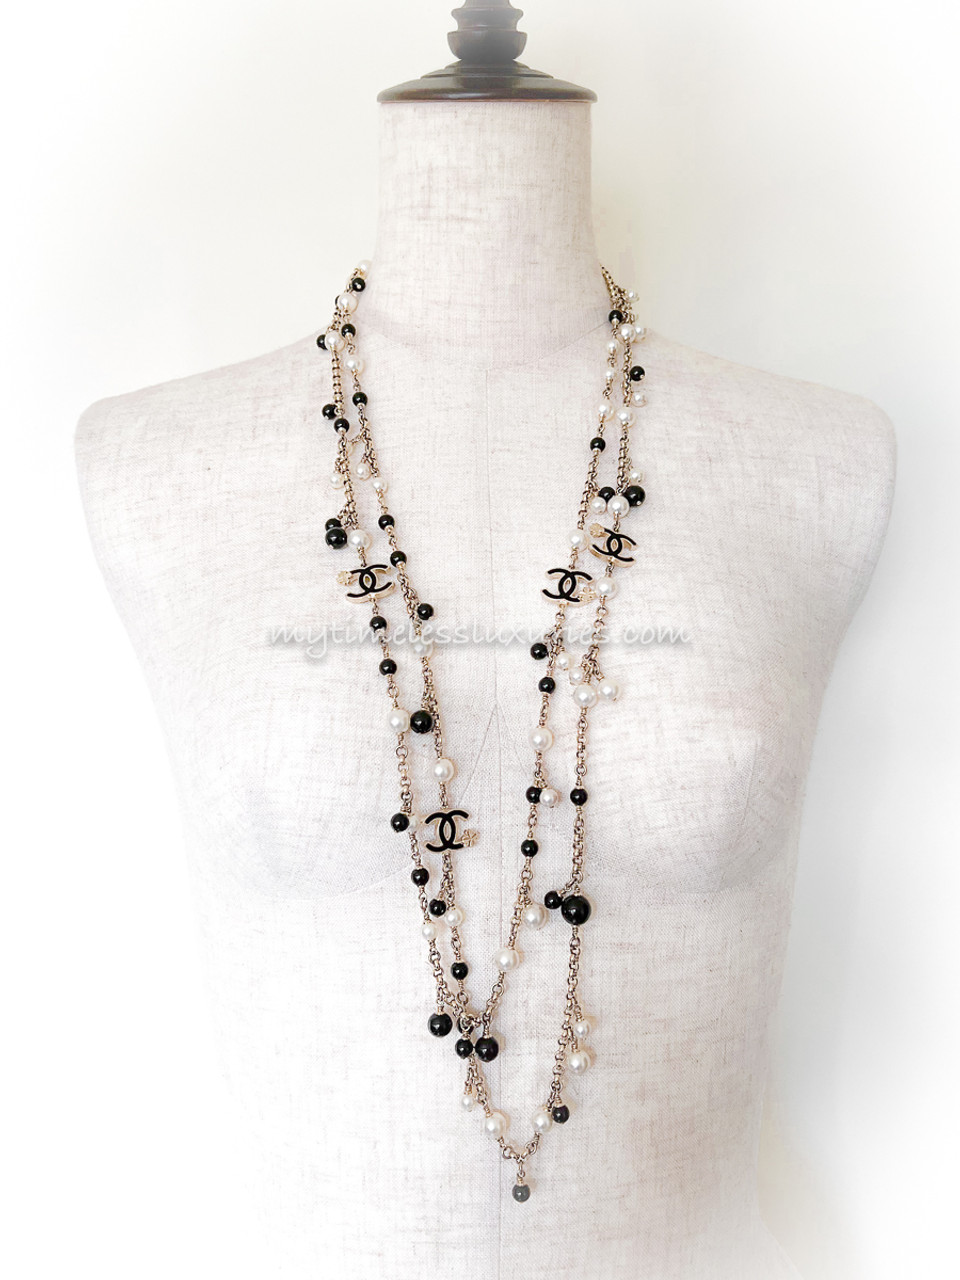 Chanel SilverBlack Crystal CC Necklace w Pearl Detail  Mine  Yours